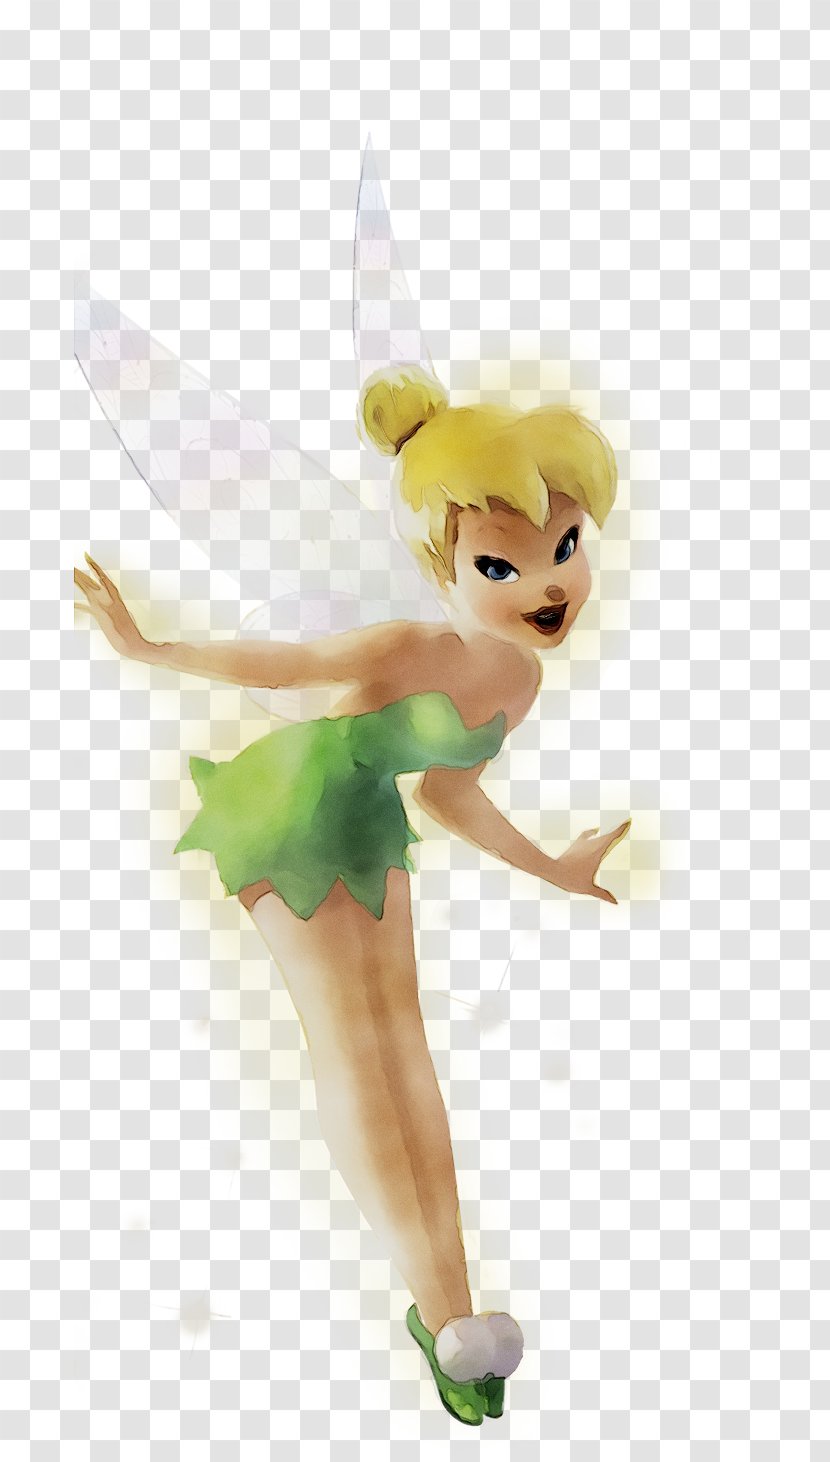 Tinker Bell Disney Fairies The Walt Company Fairy Dobby House Elf - Plant - Wing Transparent PNG